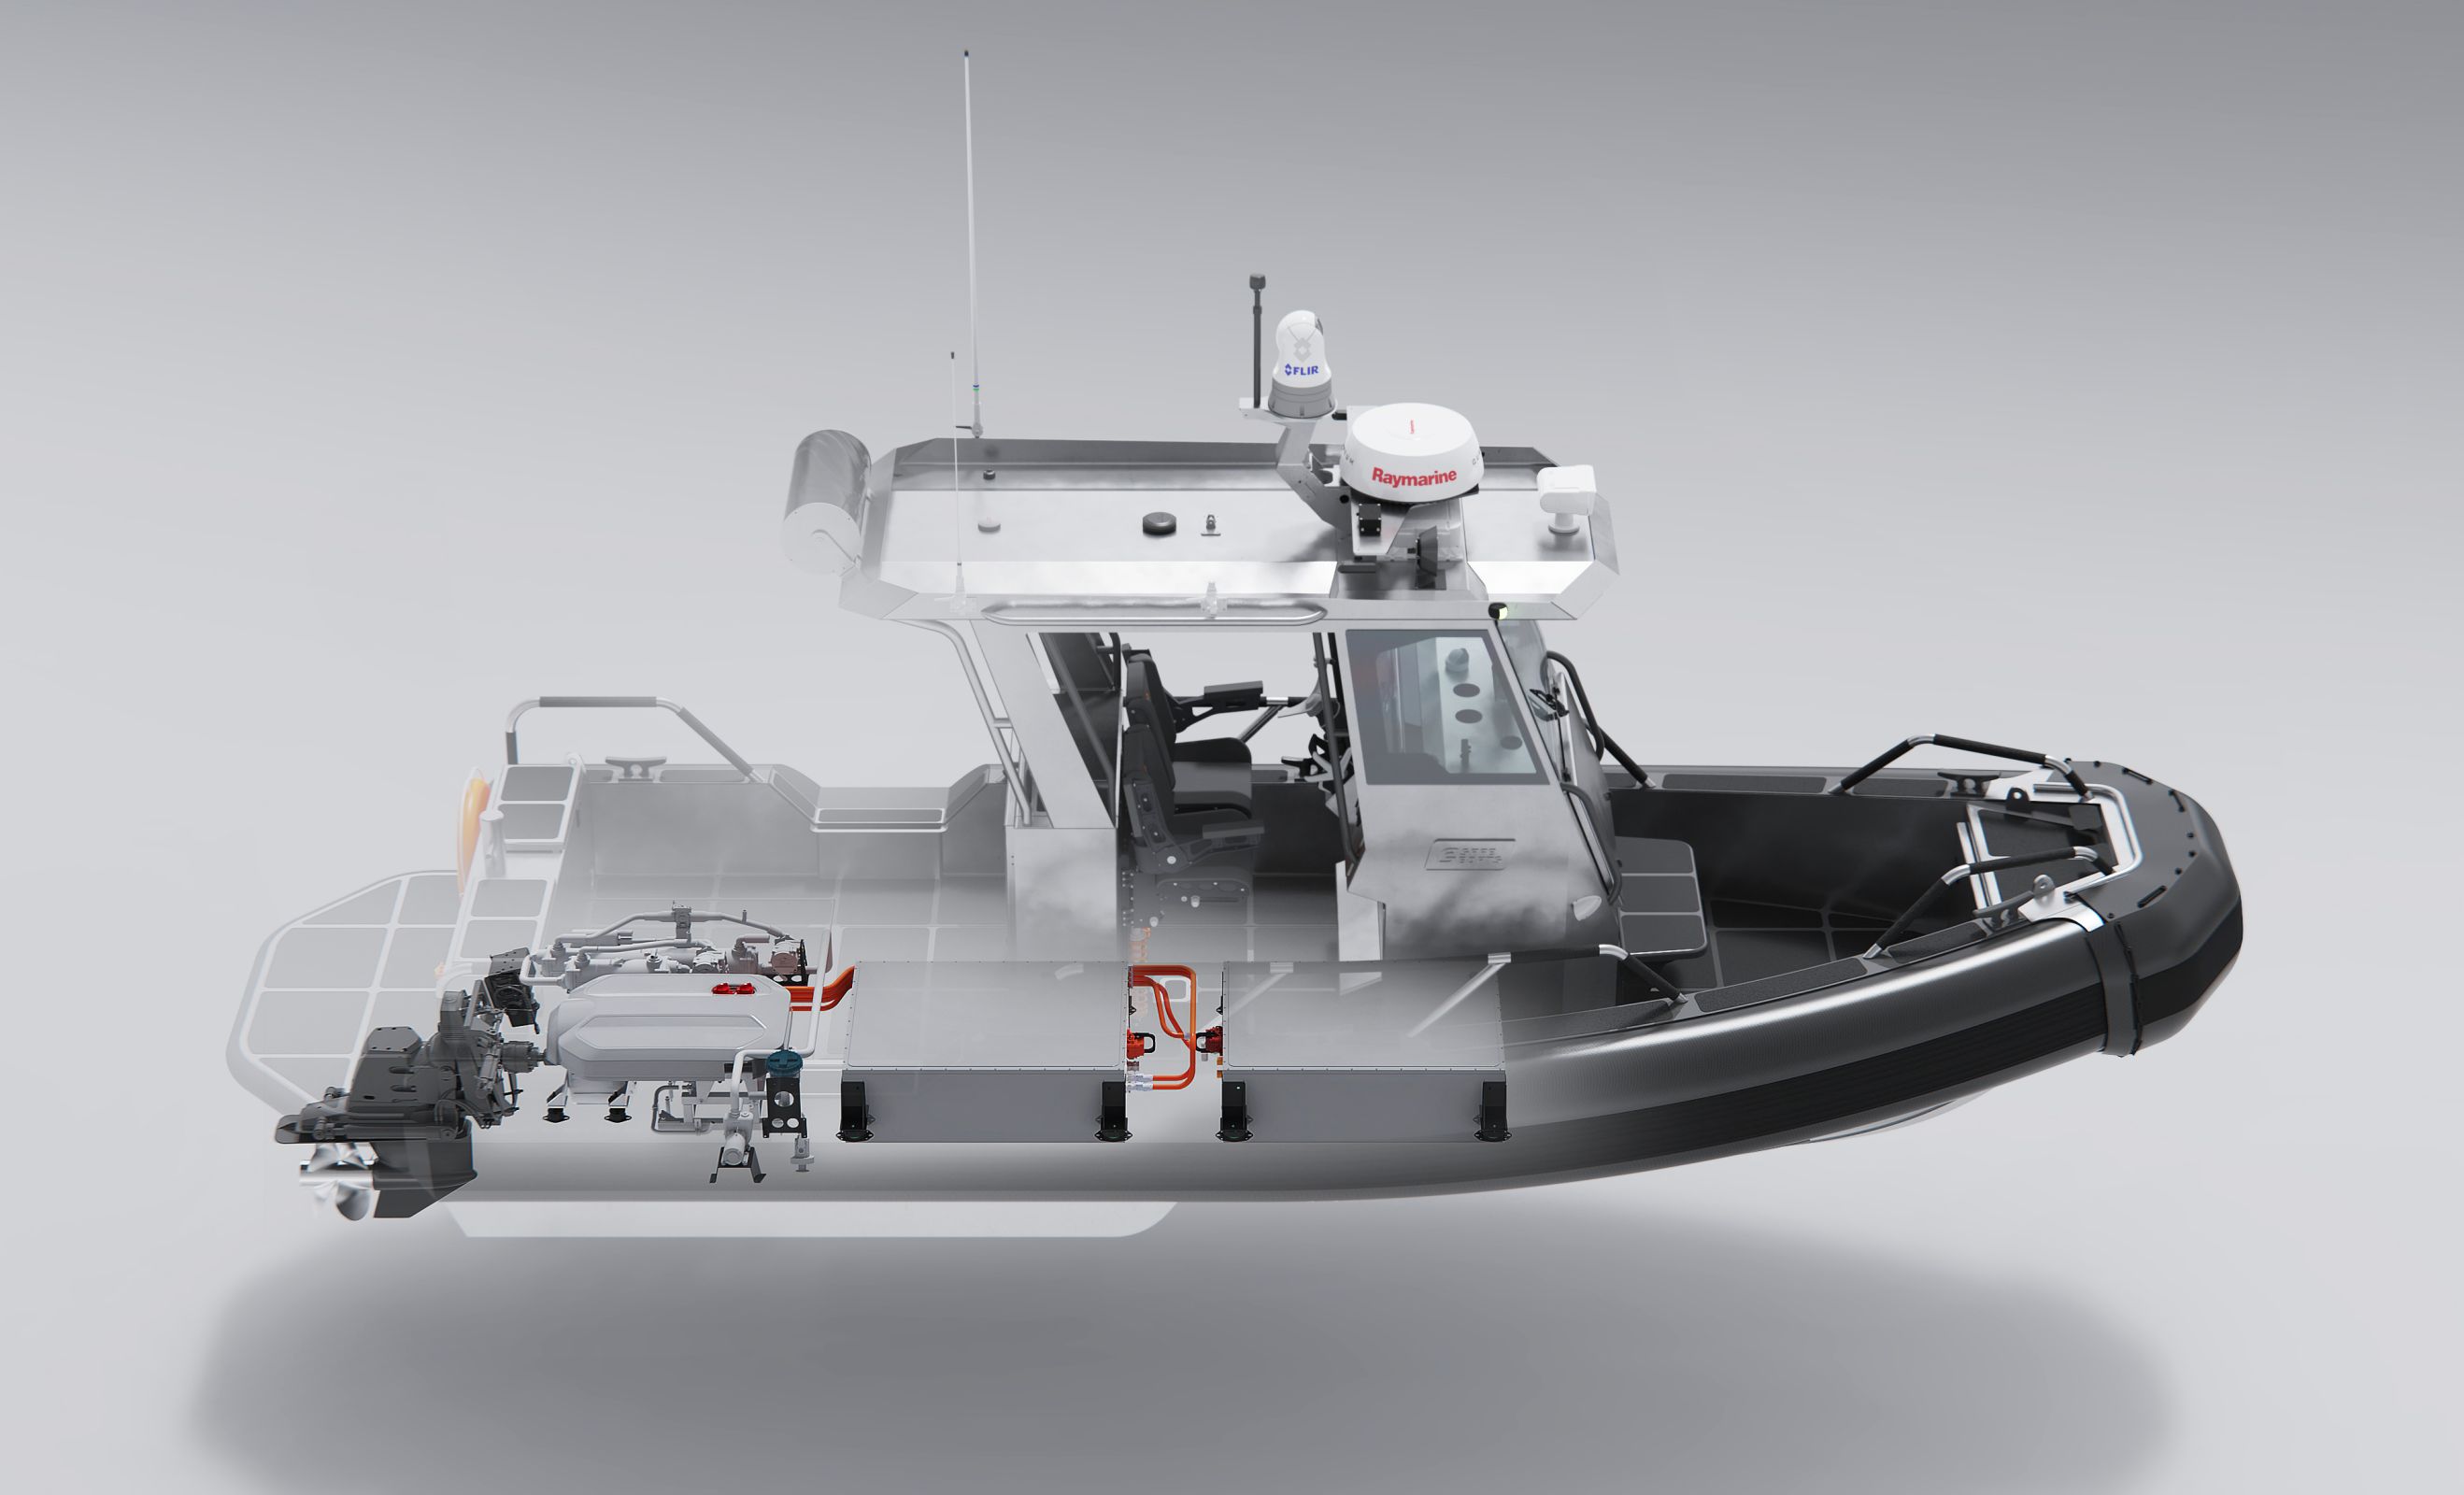 SAFE Boats and Vita Power Enter into an MOU to Build Zero-Emission Patrol Boat Options Photo - Click Here to See